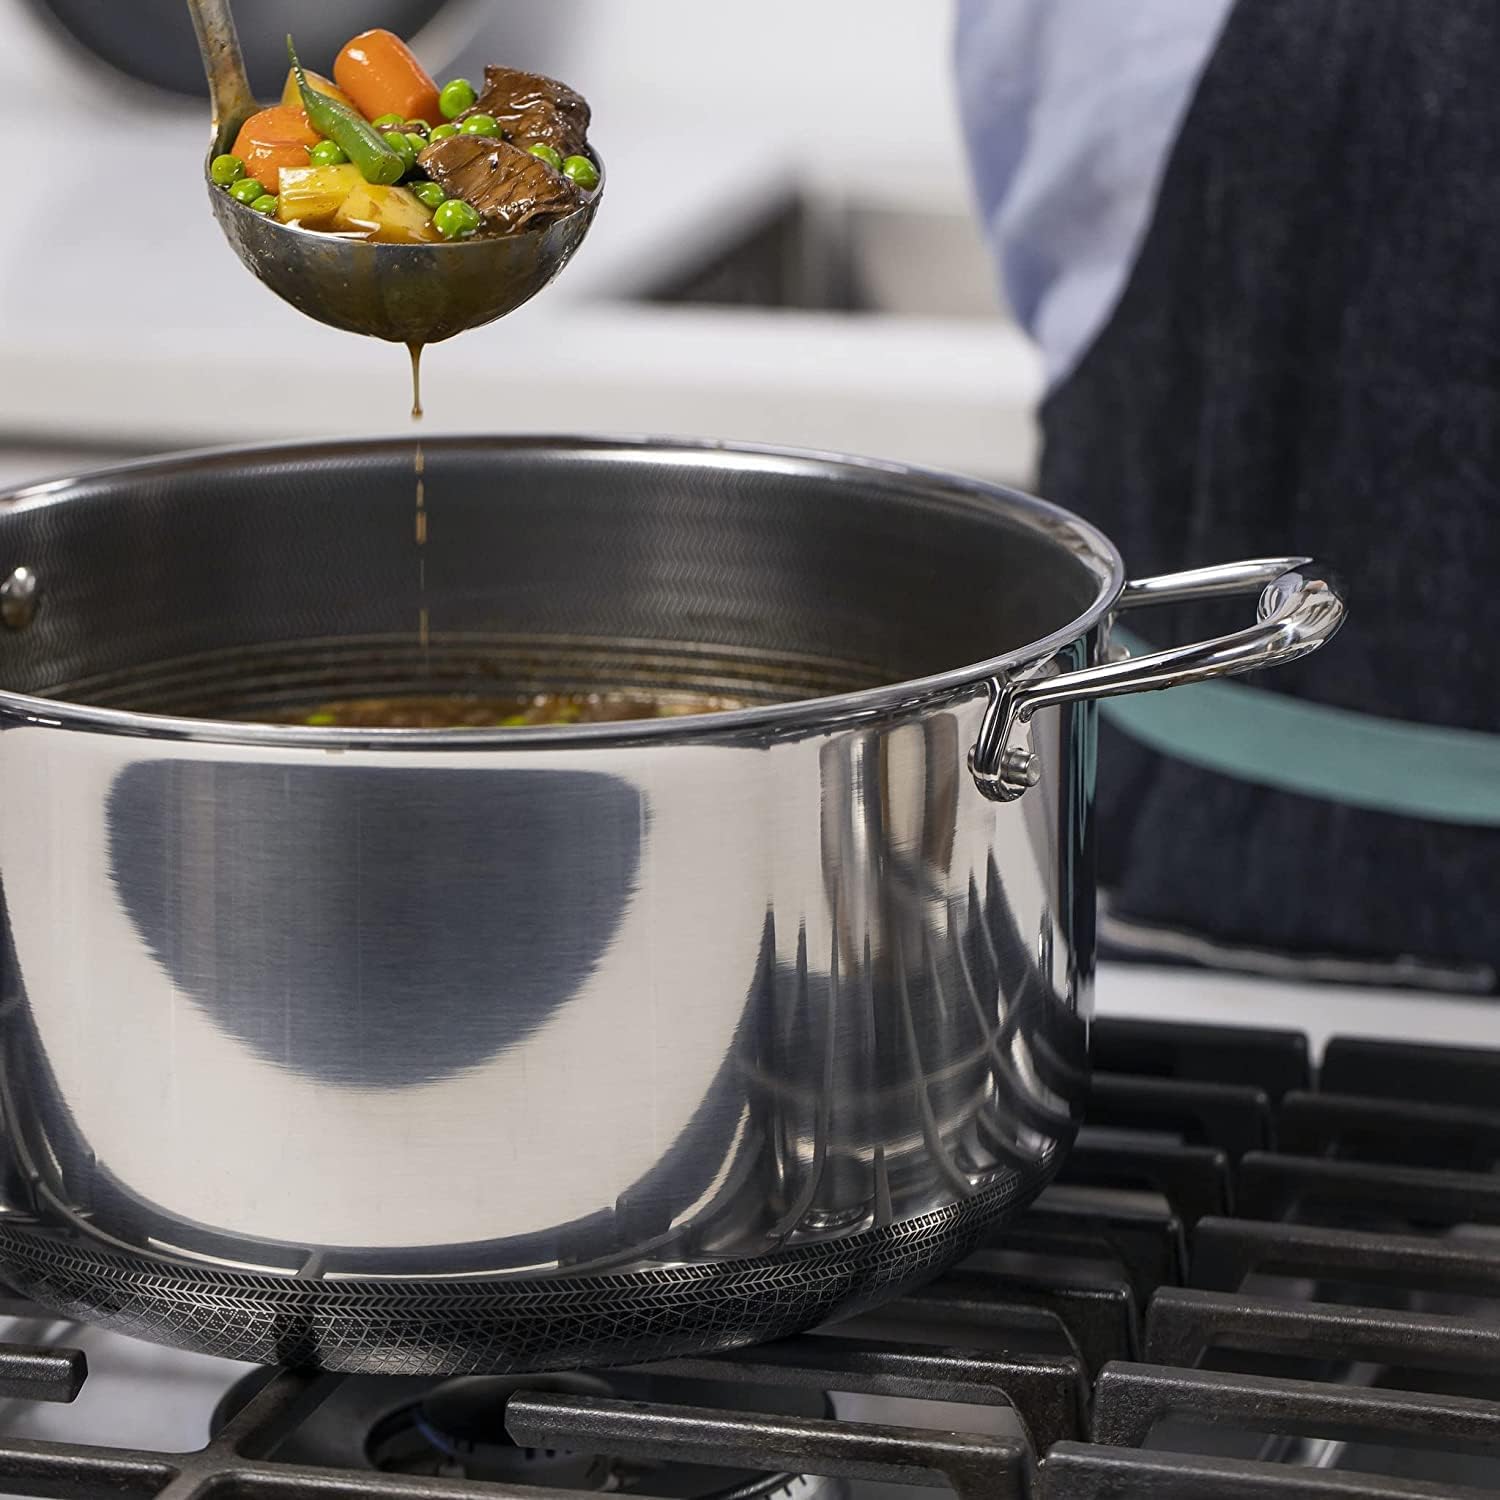 HexClad Hybrid Nonstick 10-Quart Stockpot with Tempered Glass Lid,  Dishwasher Safe, Induction Ready, Compatible with All Cooktops